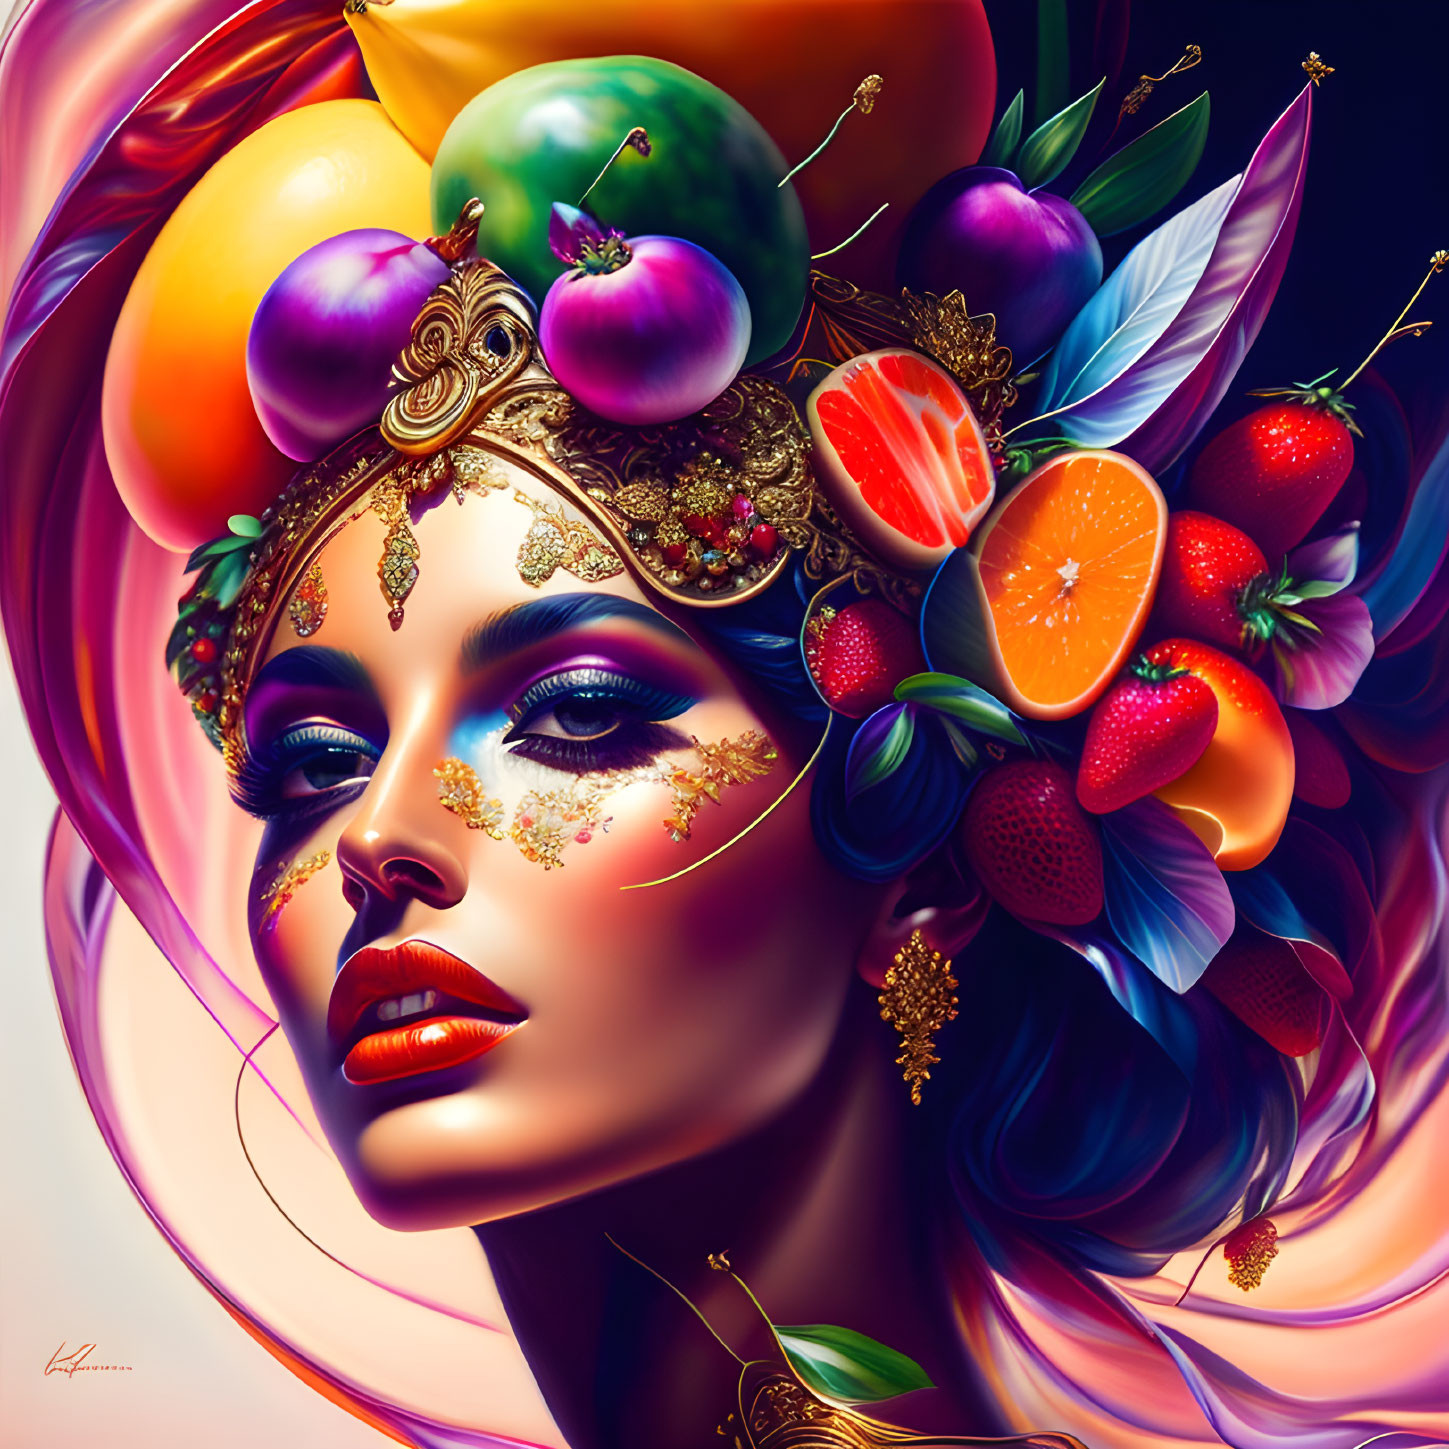 Colorful portrait of woman with fruit and flower headdress & gold jewelry